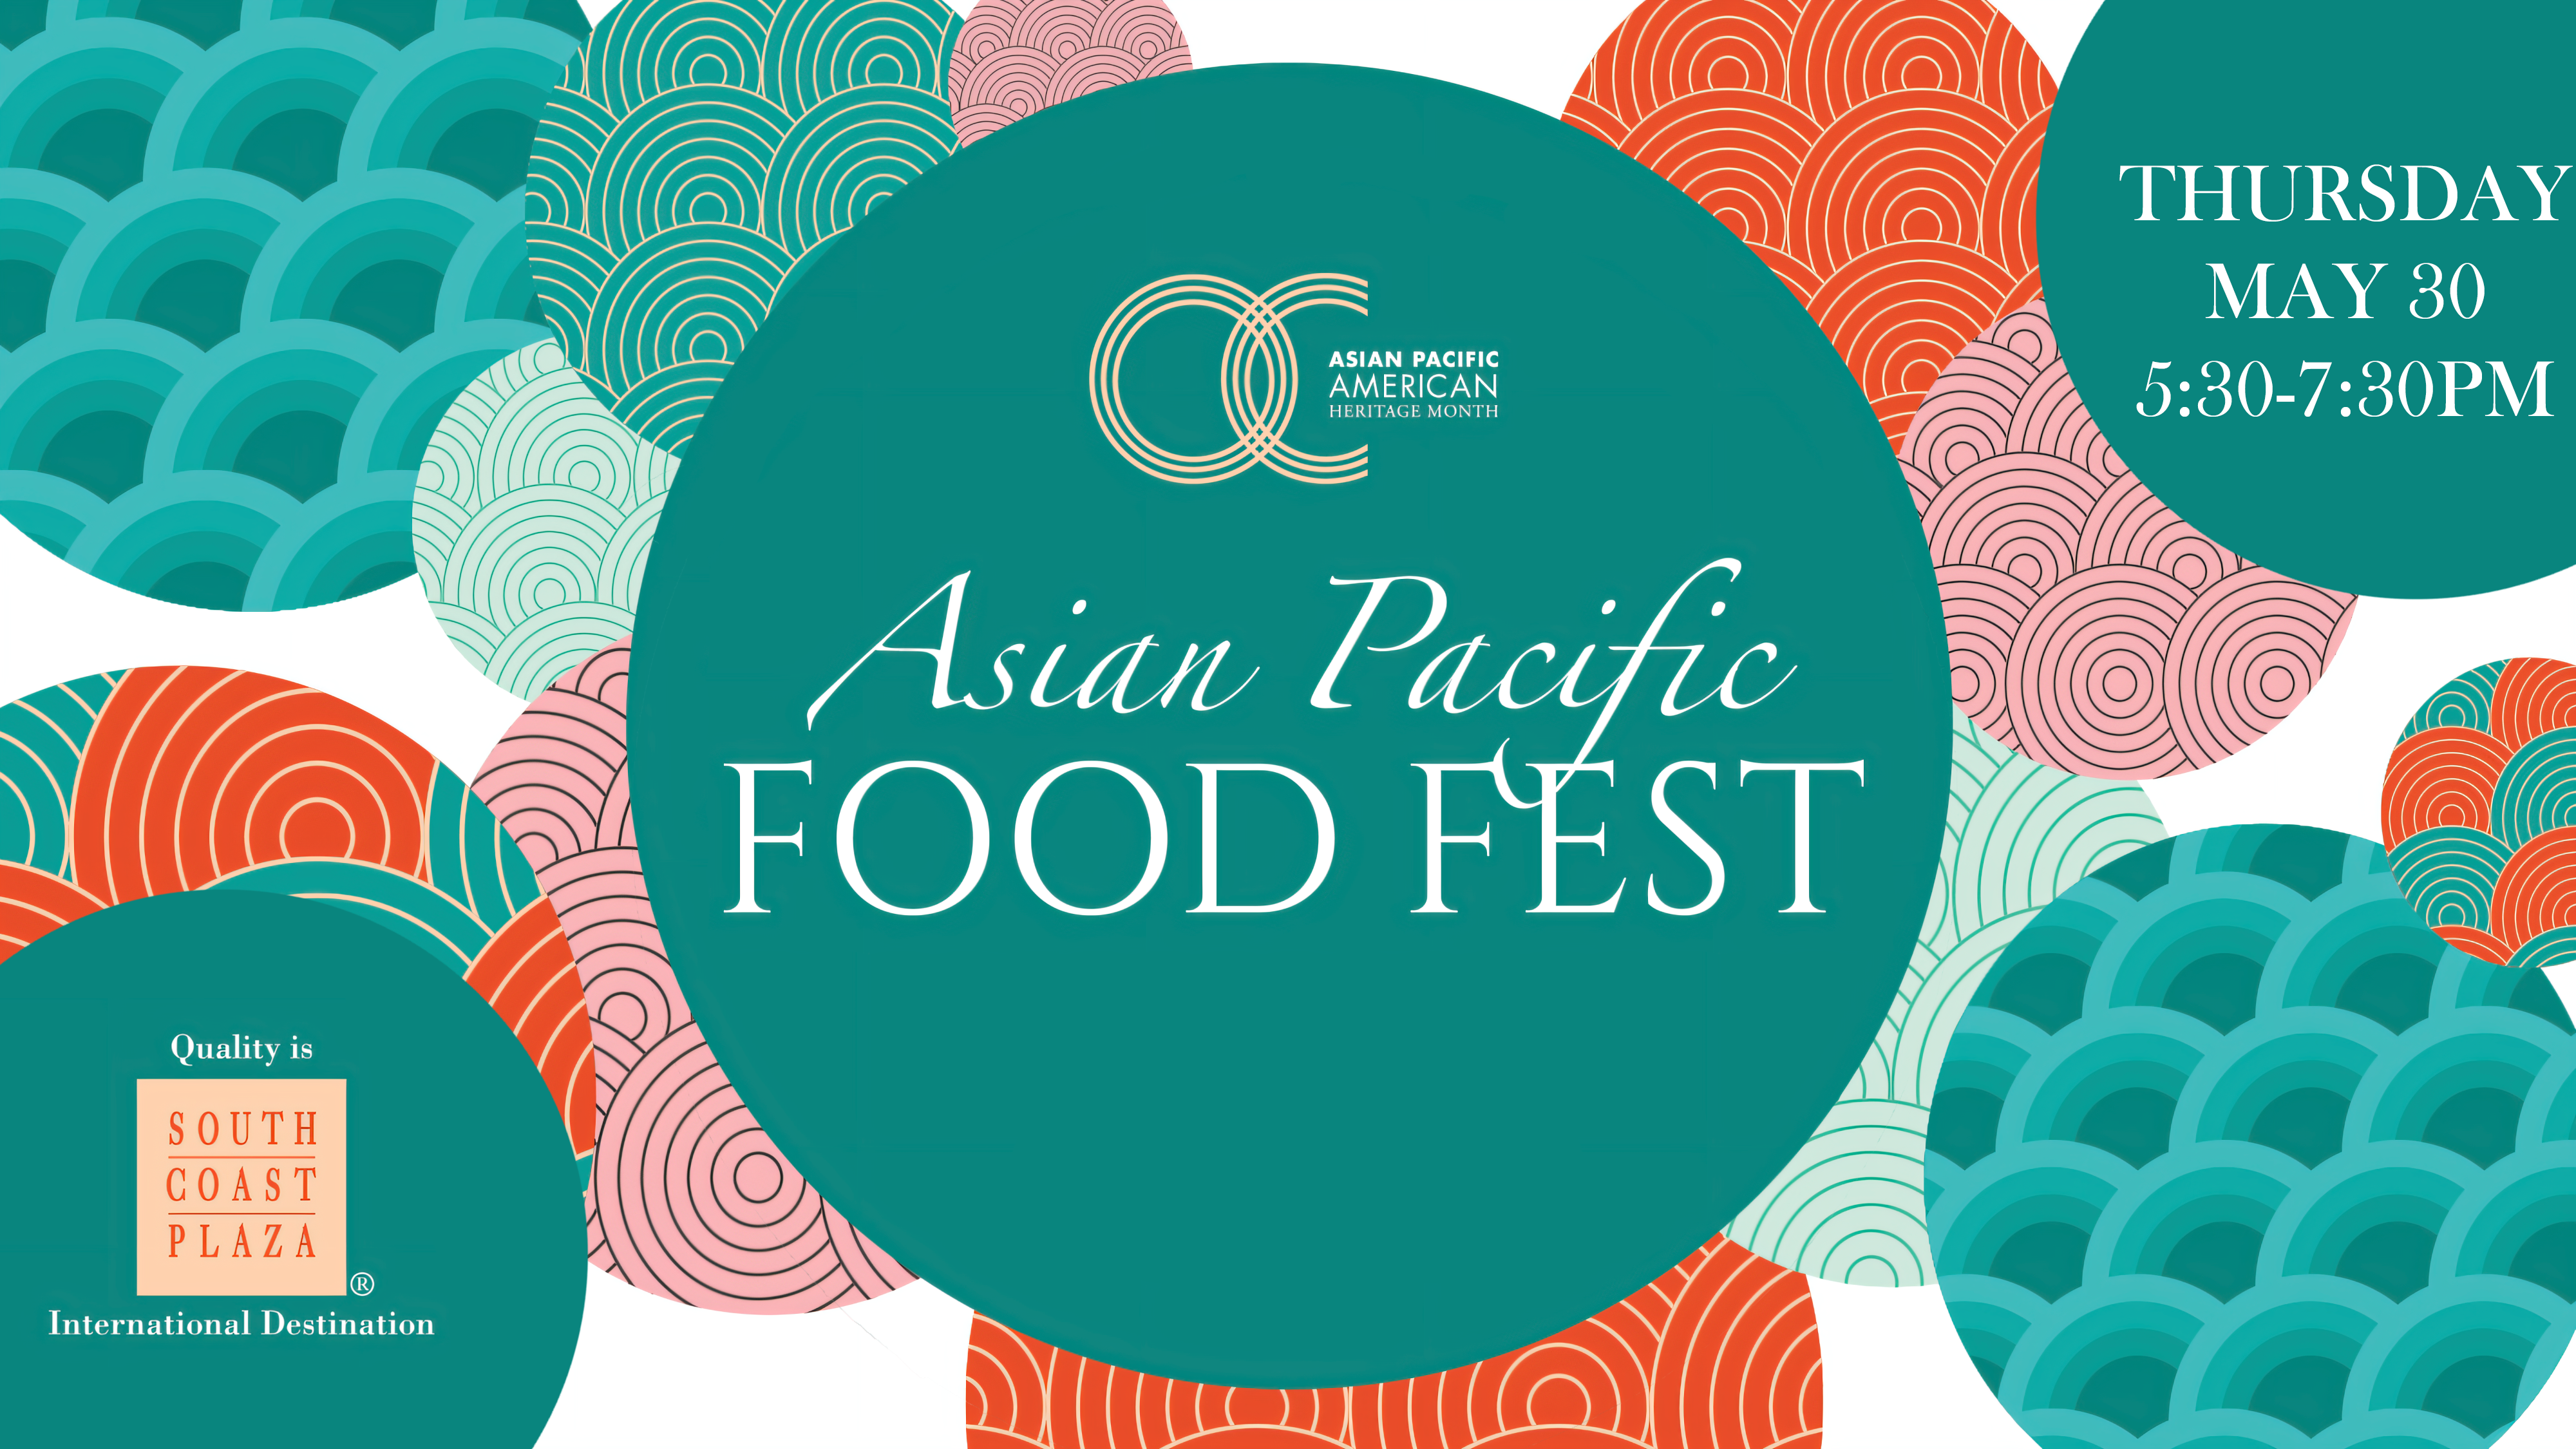 Asian Pacific Food Fest